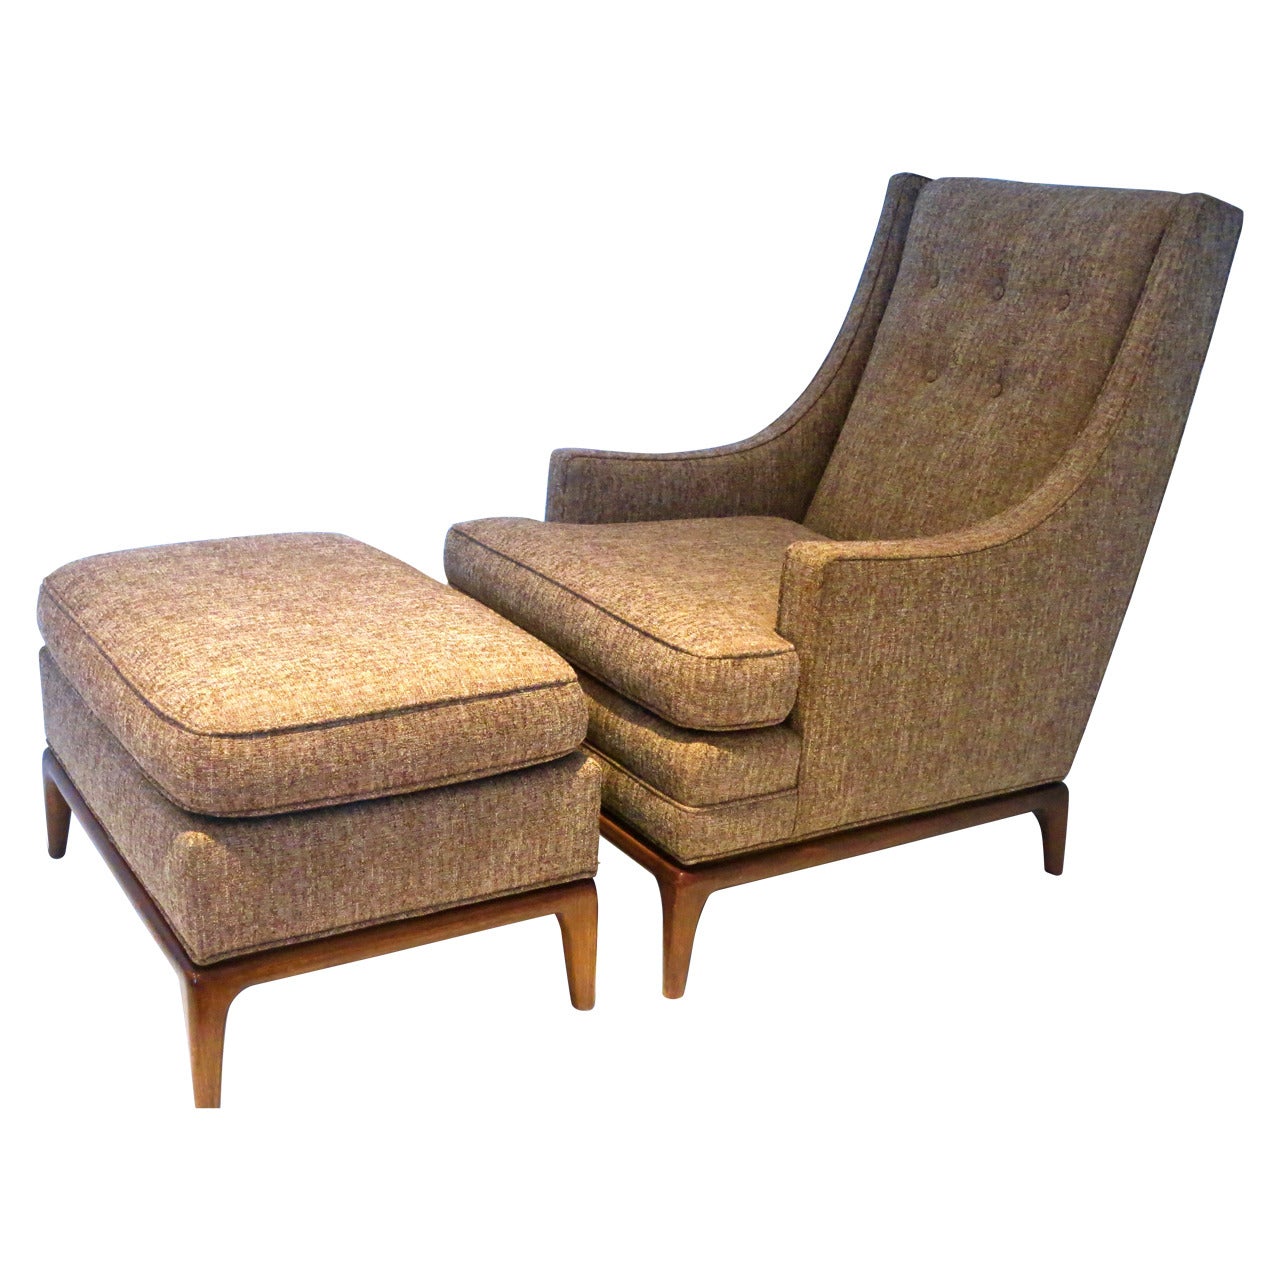 1950s Elegant Tall Back Lounge Chair and Ottoman Attributed to Robsjohn-Gibbings